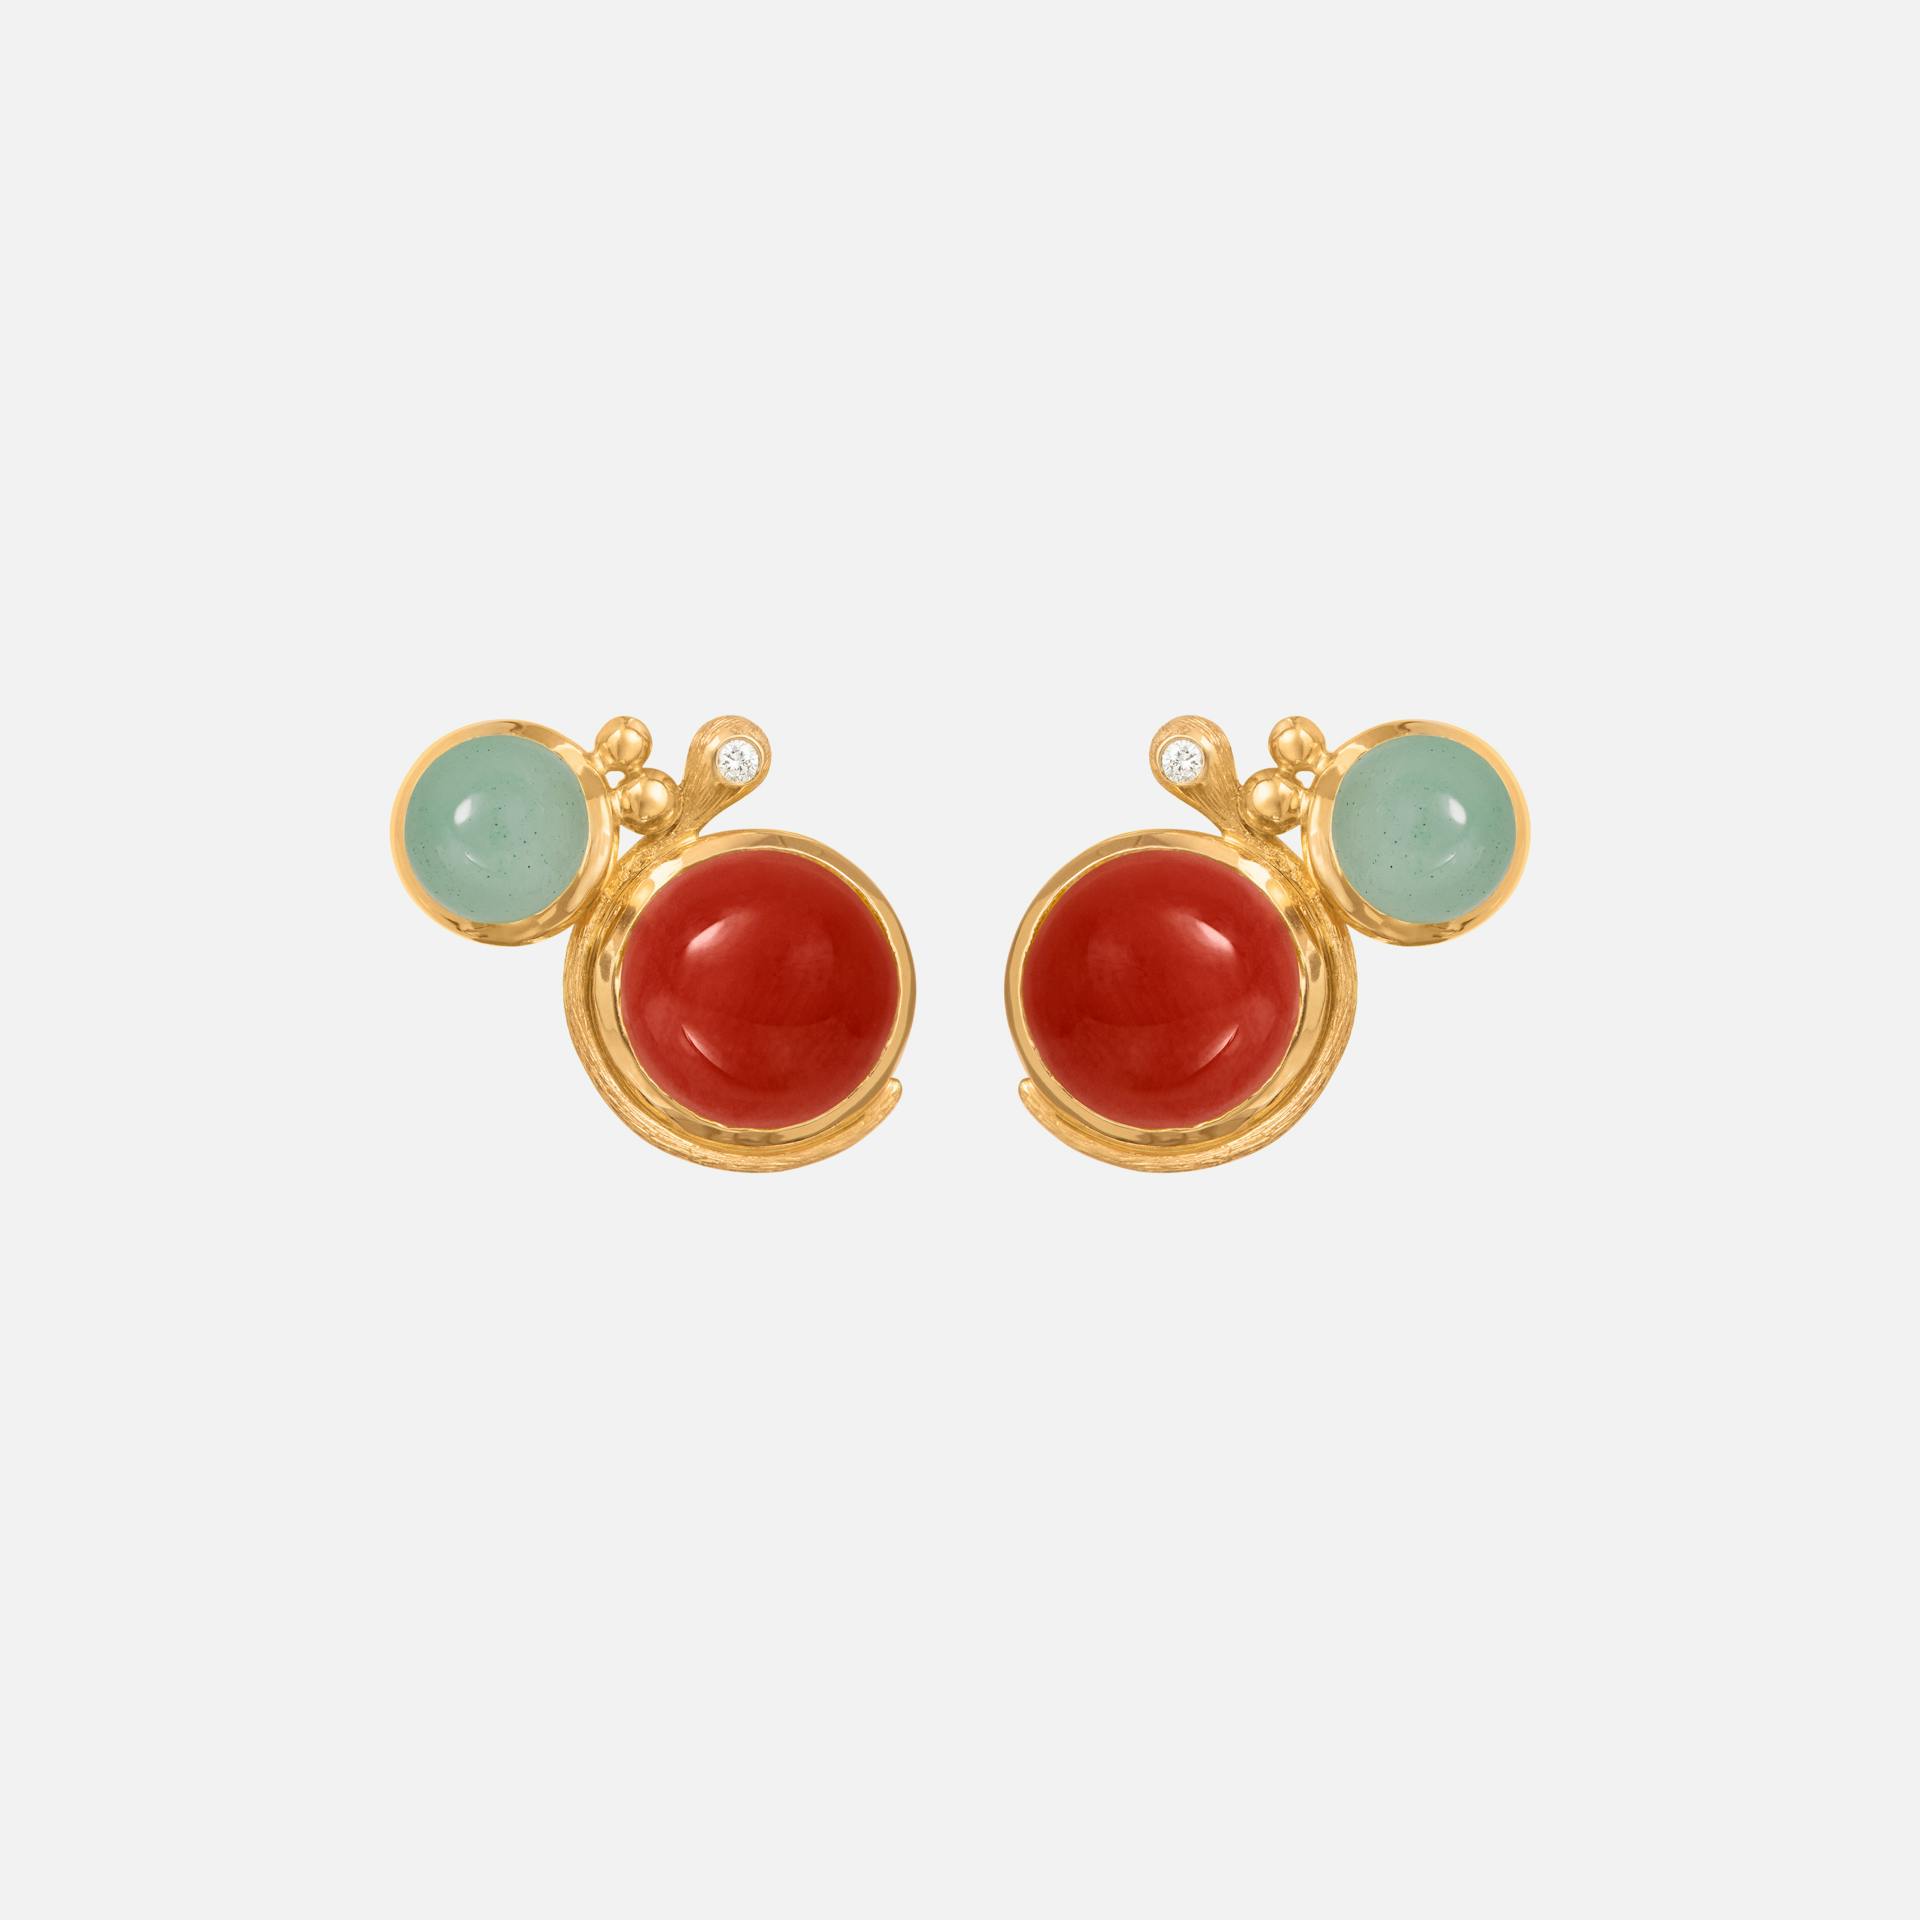 Lotus stud earrings 18k gold with aquamarine and coral